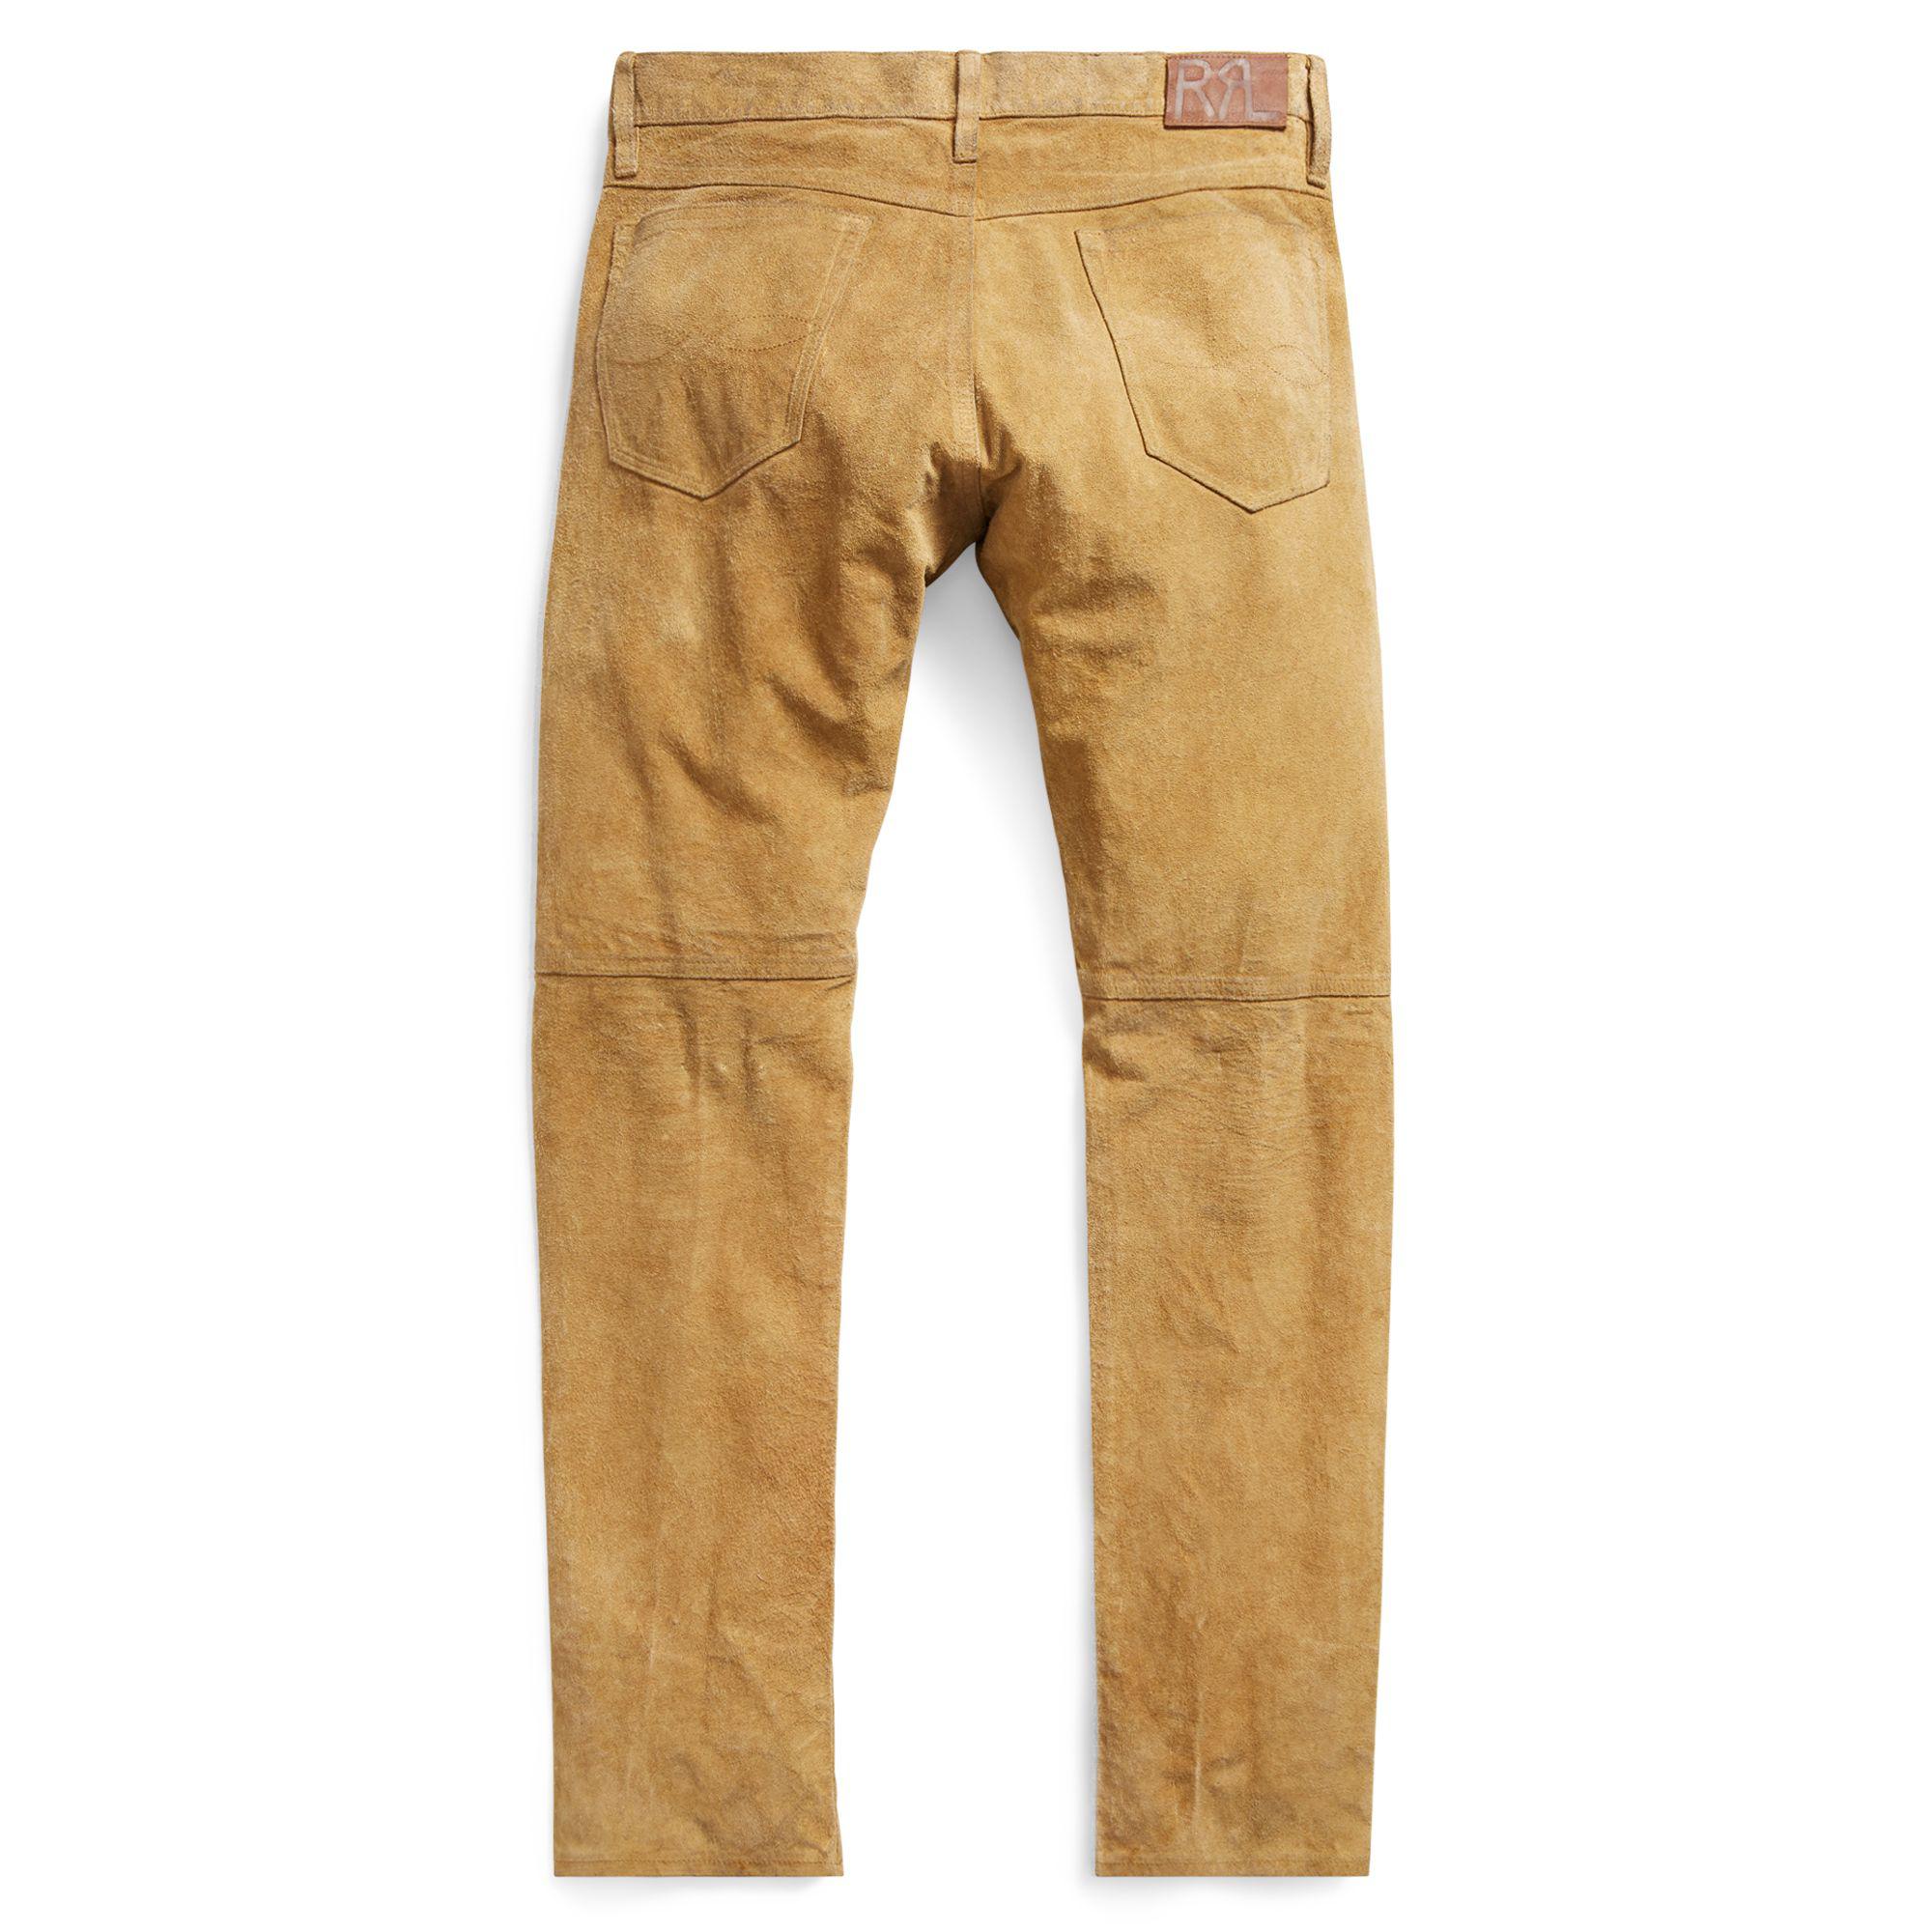 RRL Slim Fit Roughout Suede Trouser in Light Brown (Brown) for Men - Lyst